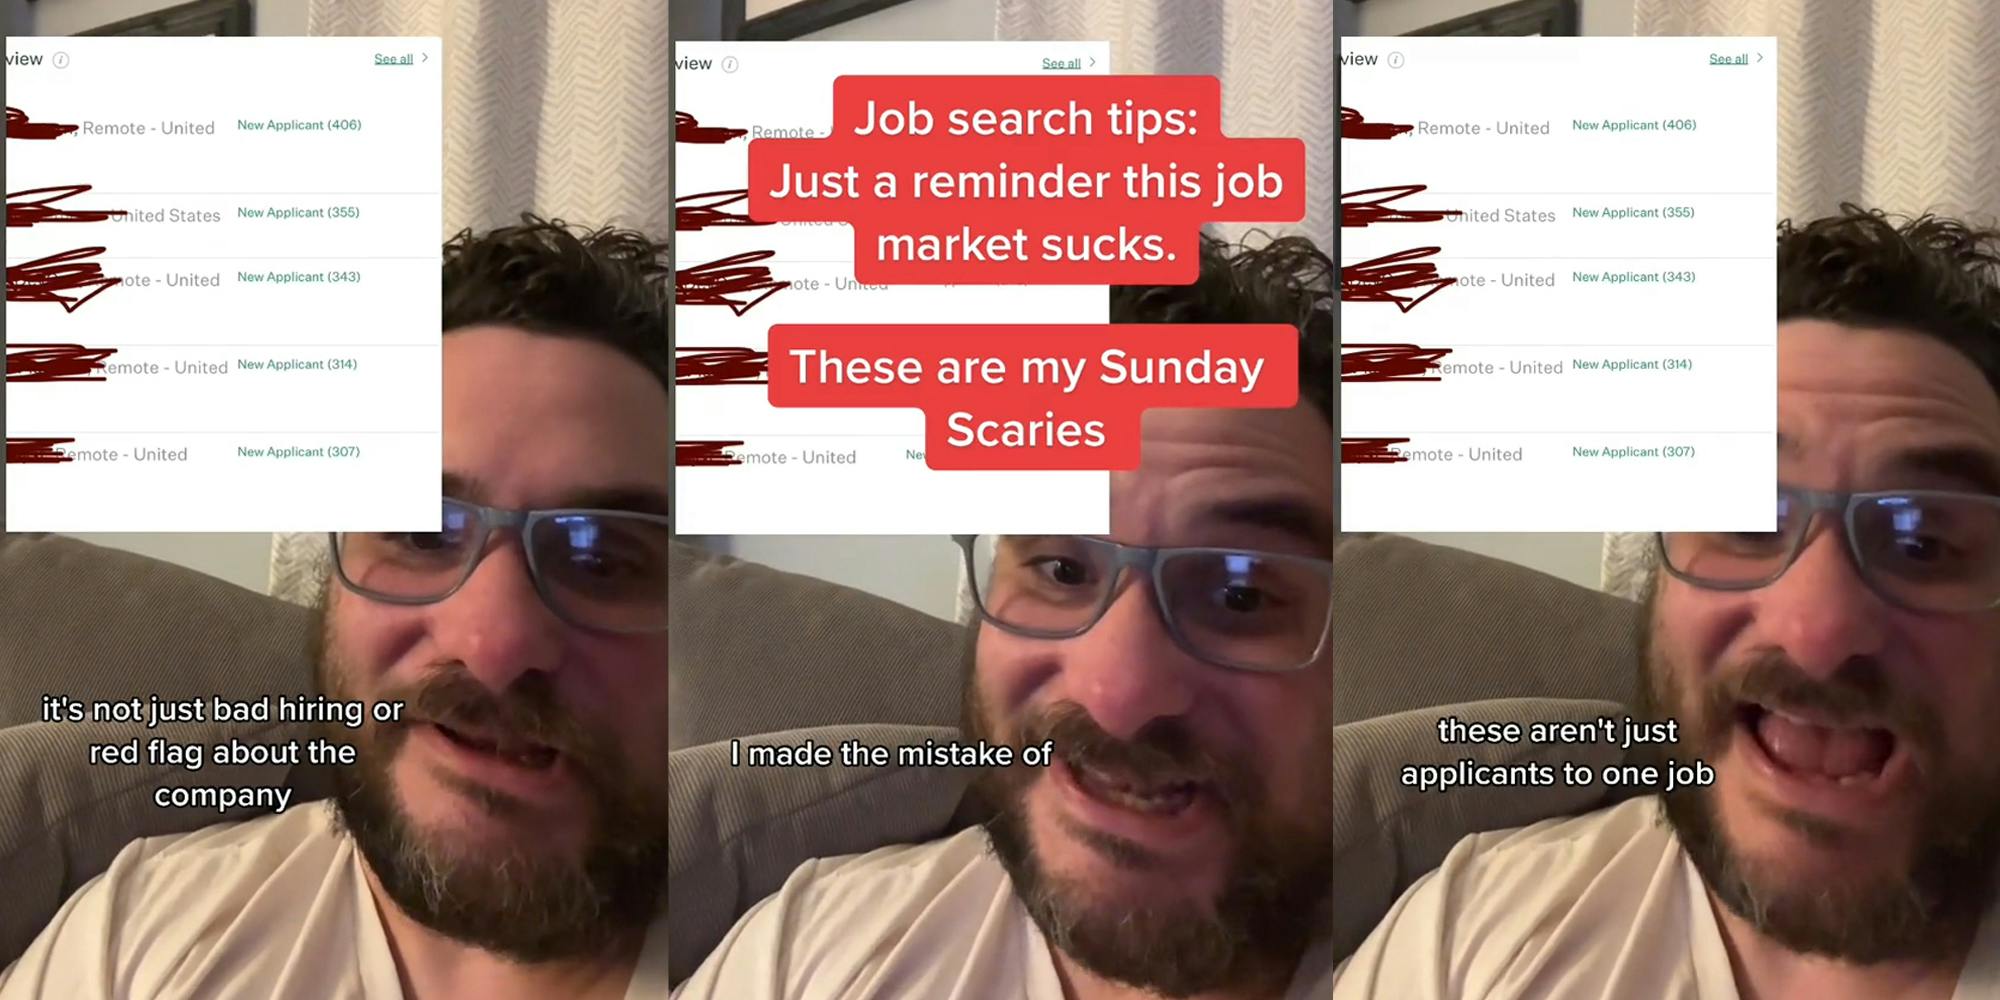 job hunter speaking with applicants image and caption "it's not just bad hiring or red flag about the company" (l) job hunter speaking with applicants image and caption "Job search tips: Just a reminder this job market sucks. These are my Sunday Scaries" "I made the mistake of" (c) job hunter speaking with applicants image and caption "these aren't just applicants to one job" (r)